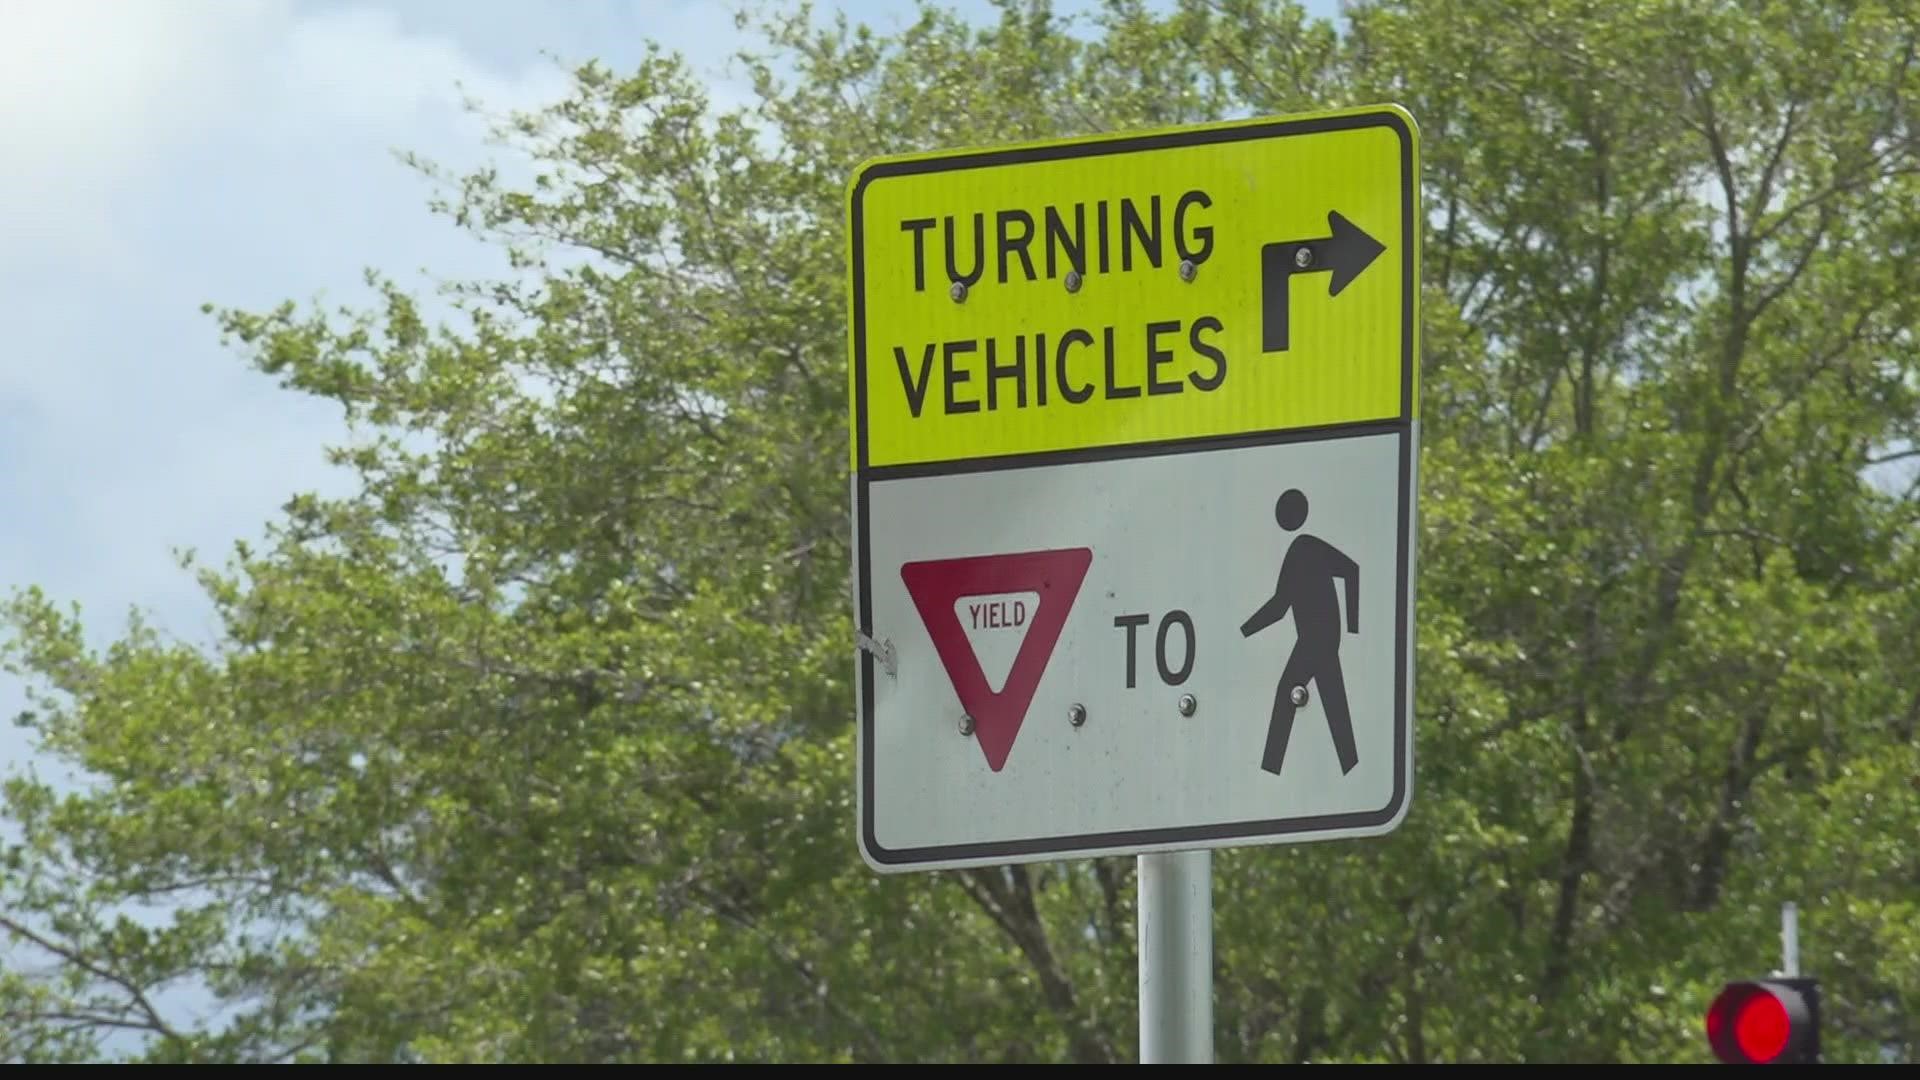 264 pedestrians died in Jacksonville between 2016-2022. Beach Blvd had one of the highest numbers of accidents. A safety committee is working on improvements.